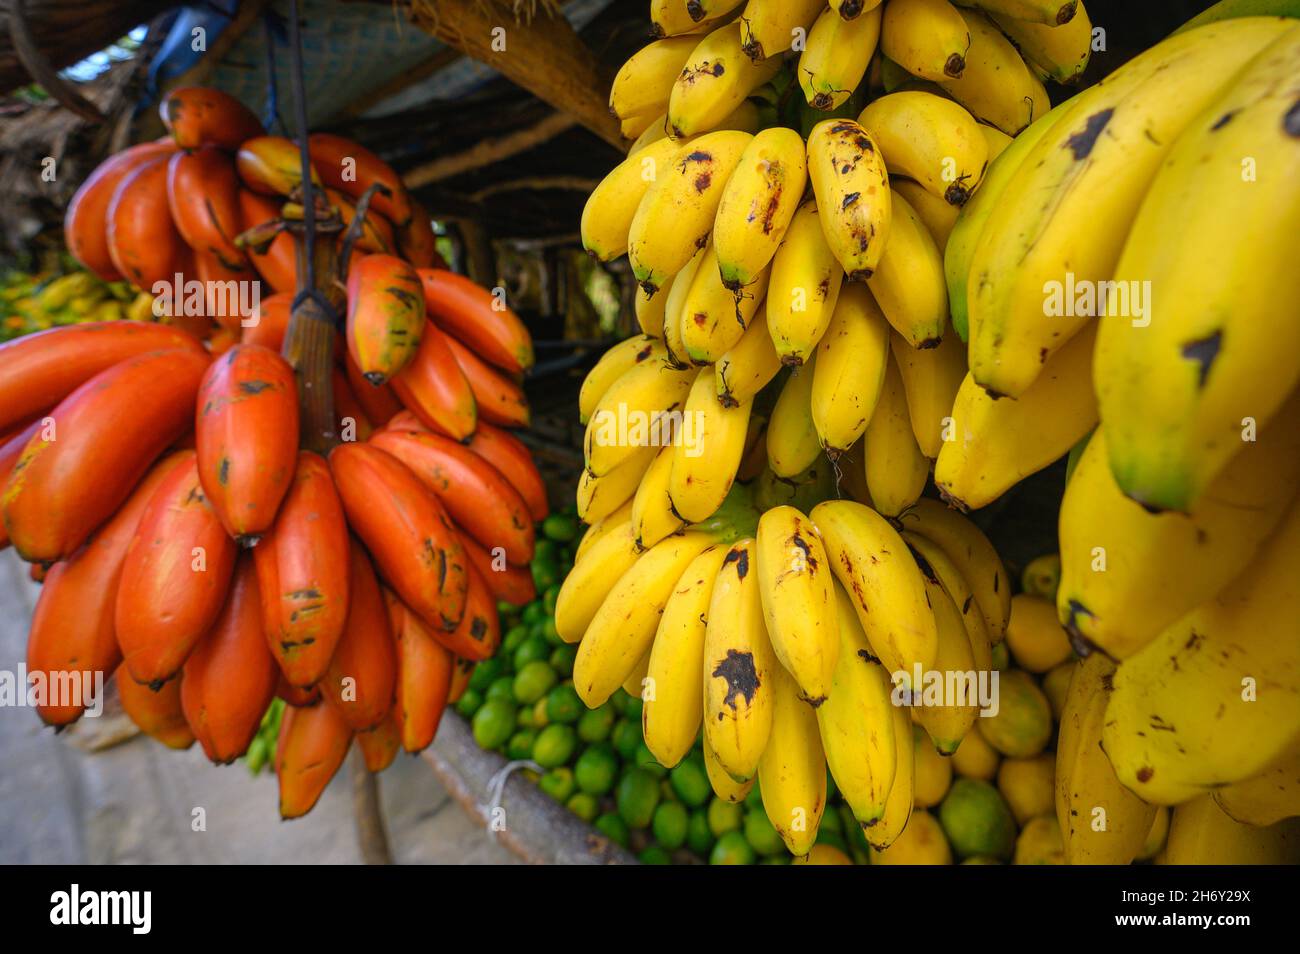 Roadside fruit market. Some tropical fruits wild orange, limes, bananas. Different fruits on tree. Exotic fruits are outdoor. Photo show variety types Stock Photo